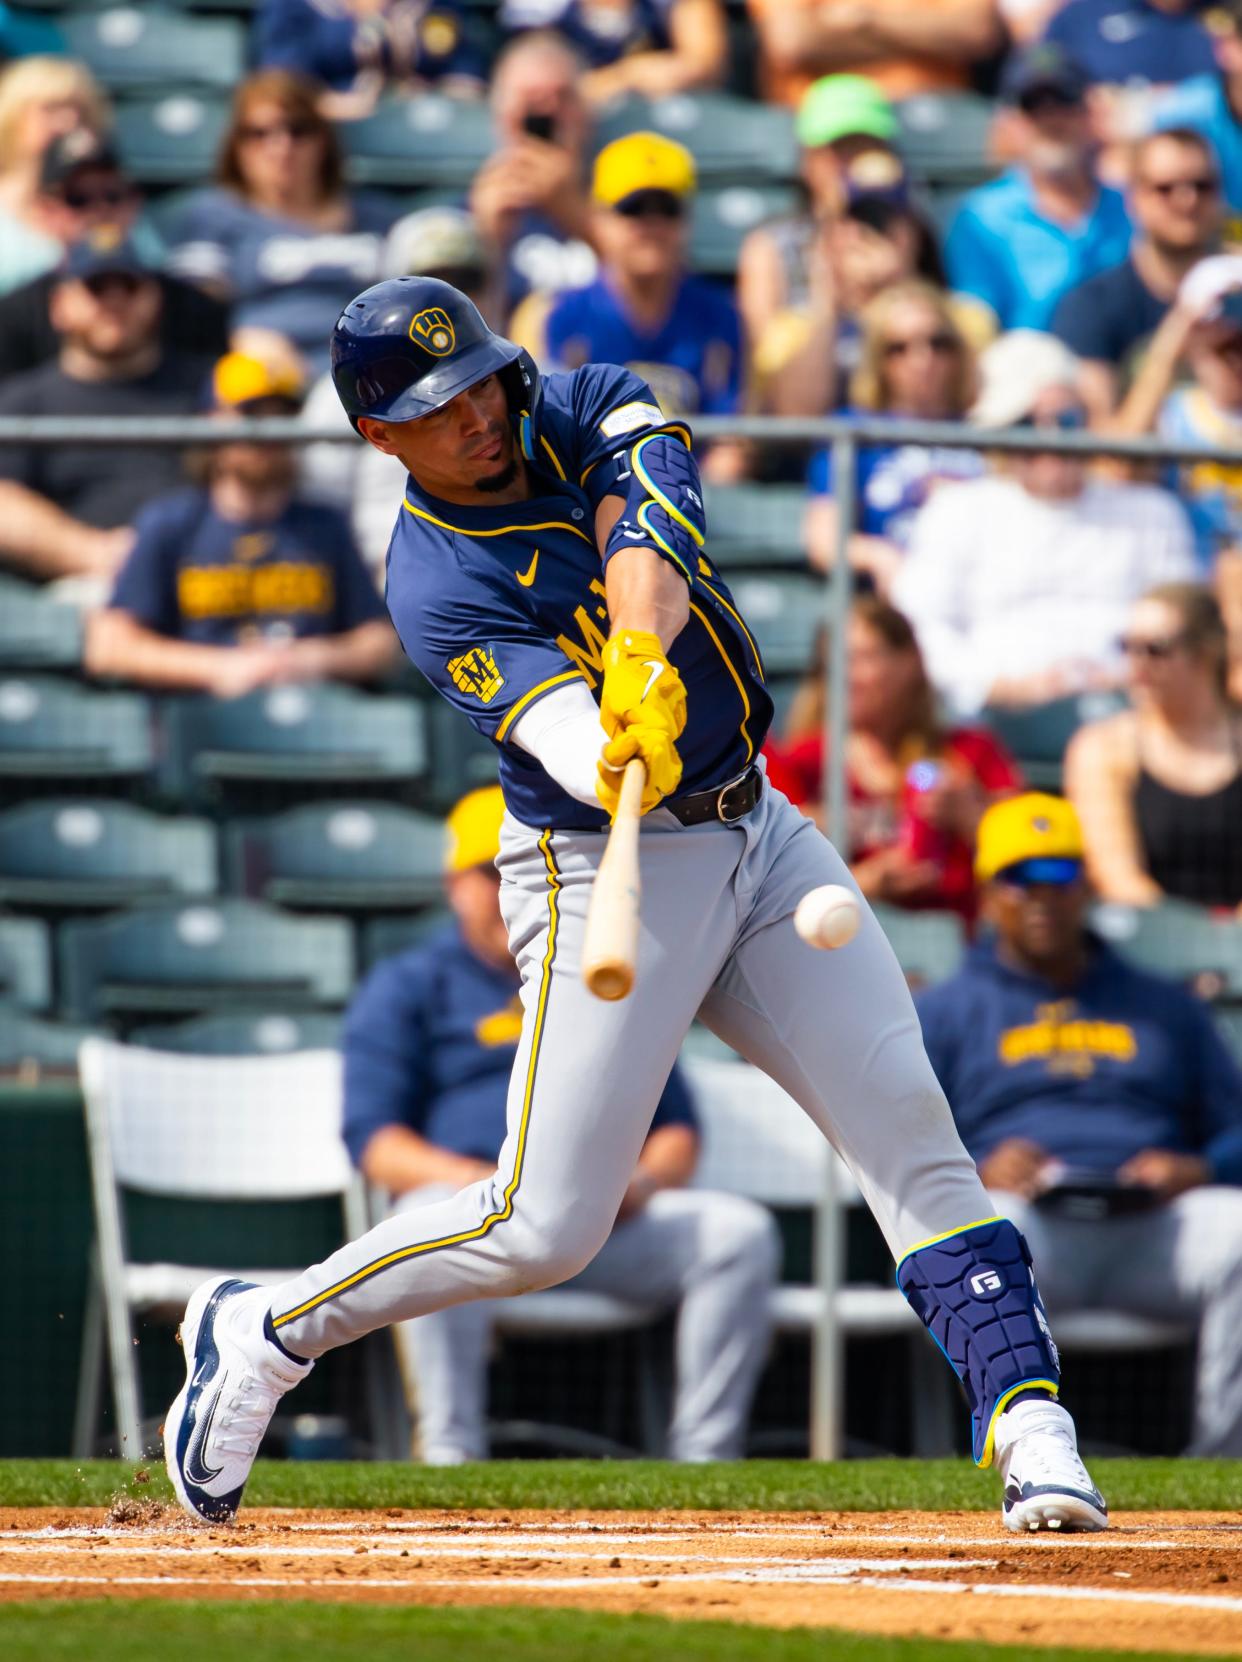 Feb 27, 2024; Tempe, Arizona, USA; Milwaukee Brewers infielder Willy Adames against the Los Angeles Angels during a spring training game at Tempe Diablo Stadium. Mandatory Credit: Mark J. Rebilas-USA TODAY Sports